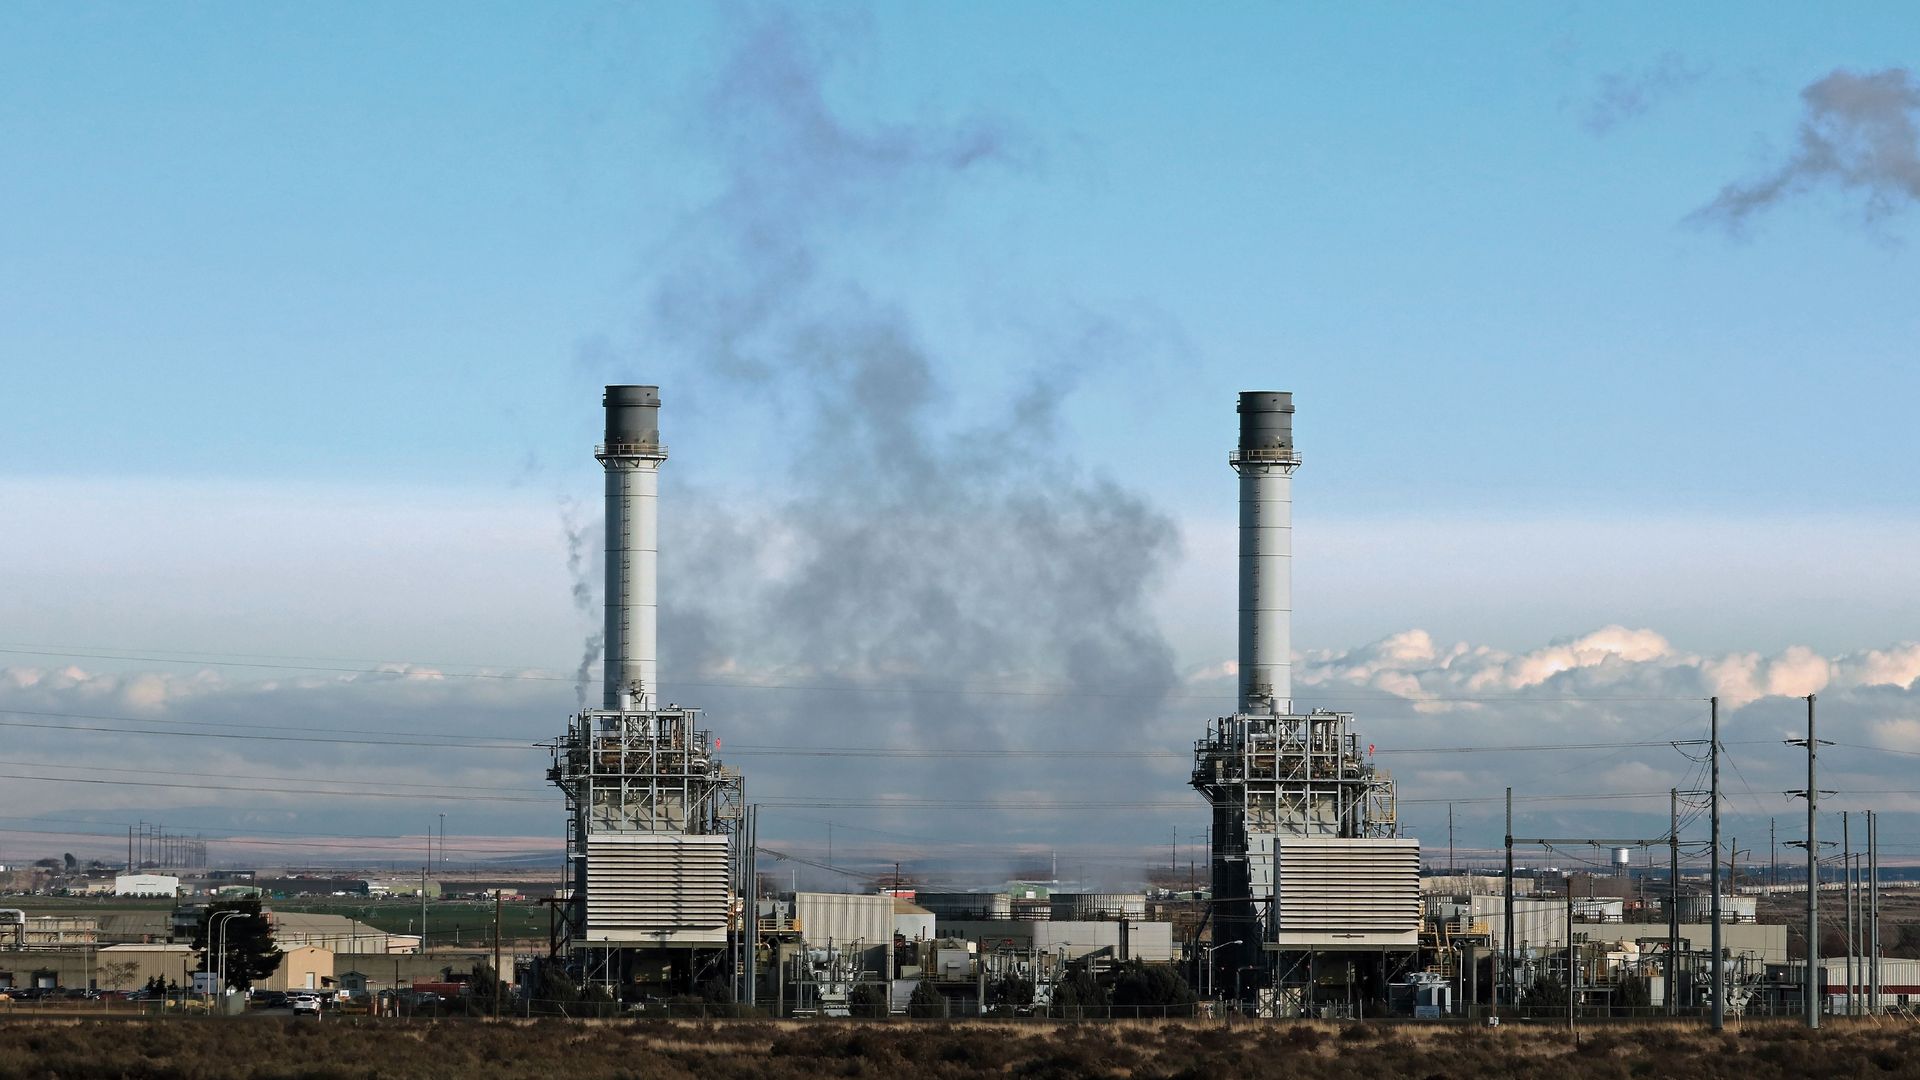 Two power plants give off smoke